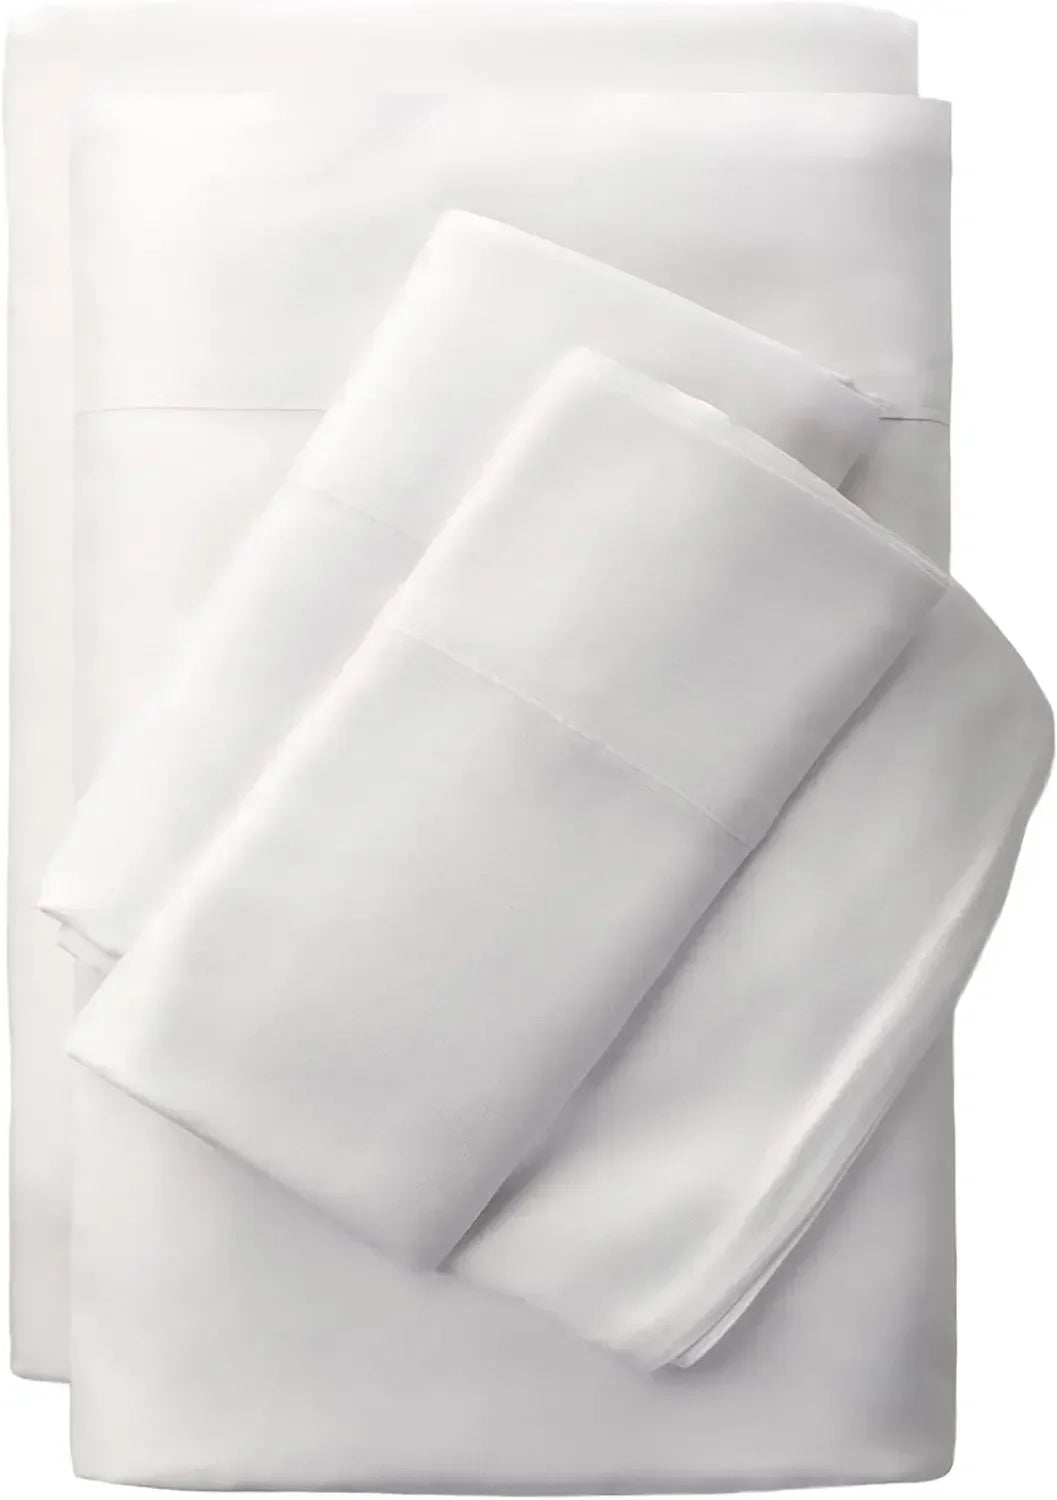 & Classic Bamboo Viscose 4 Piece Bed Sheet Set Cooling and Comfortable for Rest and Relaxation Flat and Fitted Sheet